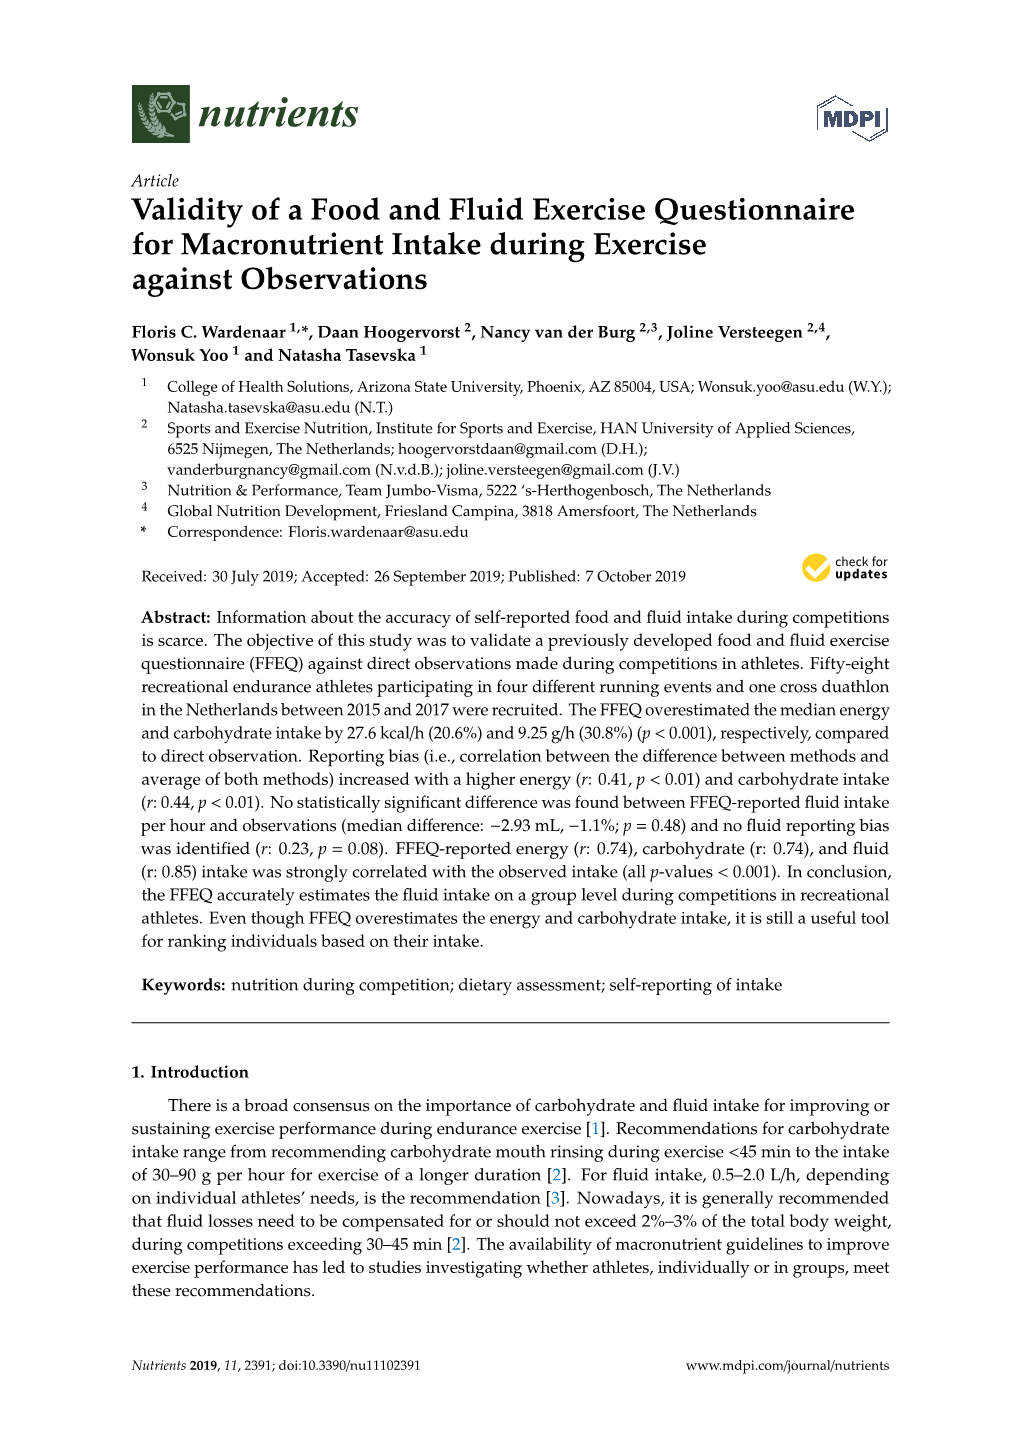 Validity of a Food and Fluid Exercise Questionnaire for Macronutrient Intake During Exercise Against Observations